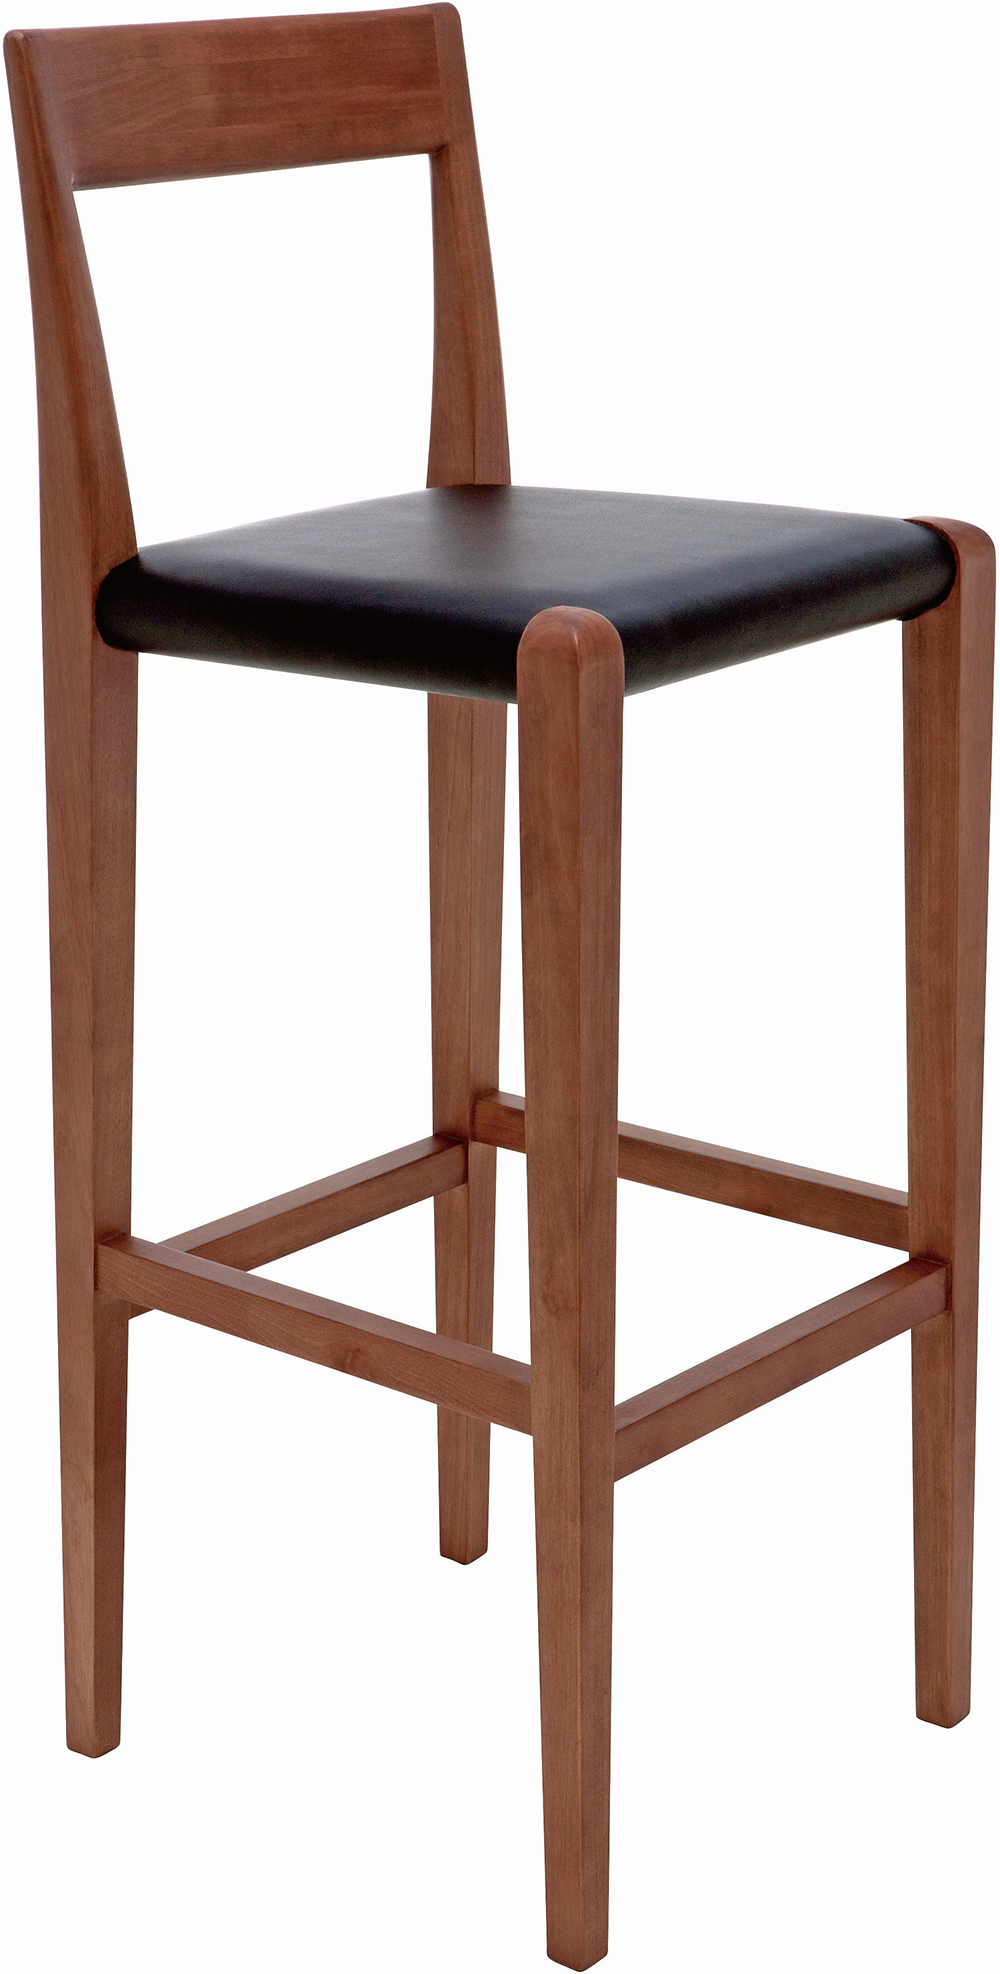 The Nuevo Living Ameri Bar Stool Is Made With Solid Birch Wood With Walnut Stain and Black Leather Upholstery.